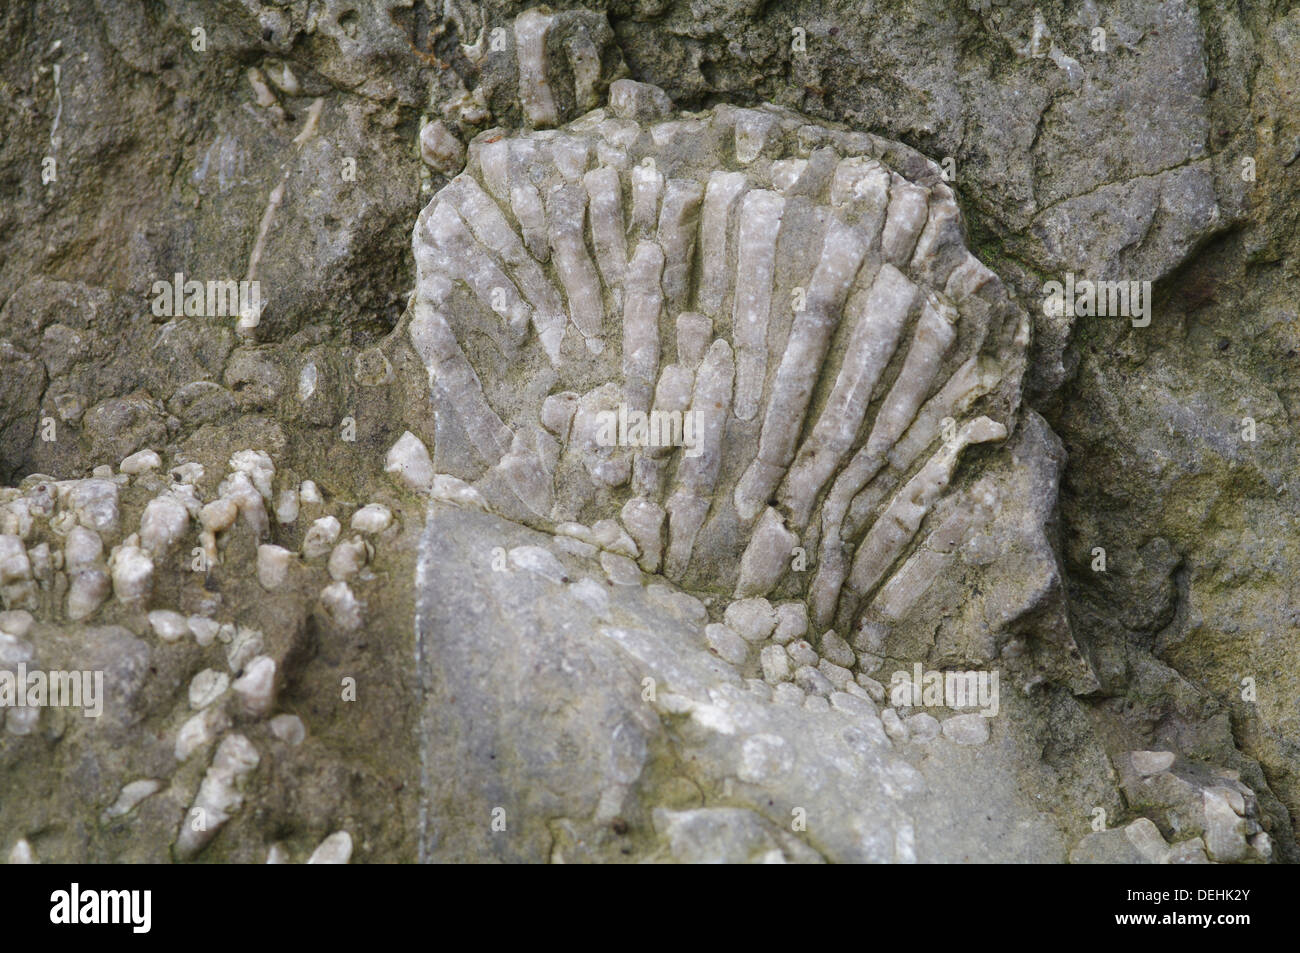 Fossilised corals in carboniferous limestone Stock Photo